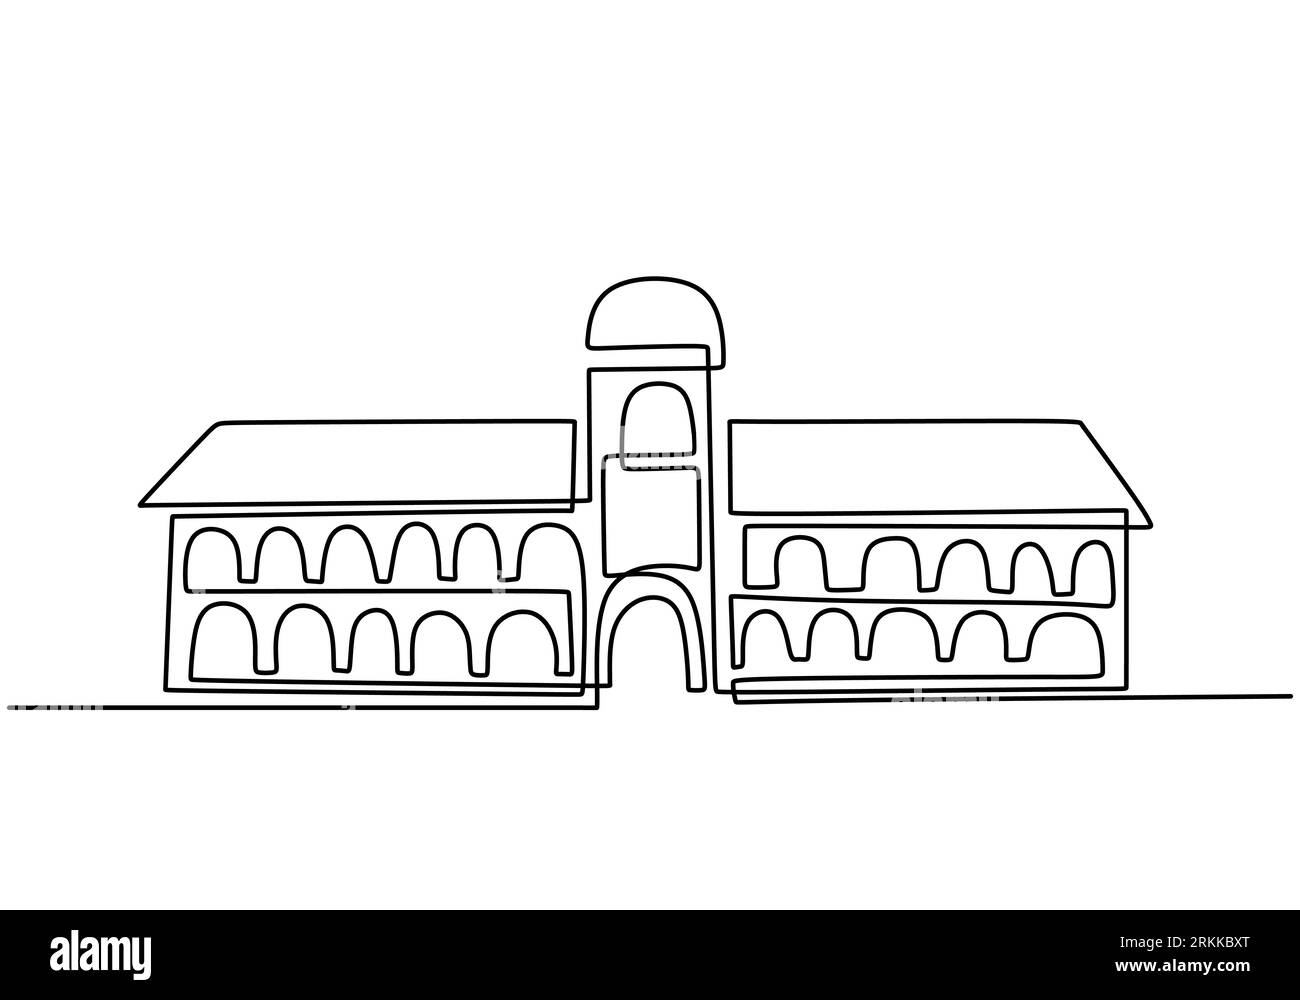 Classical building with columns in continuous one line drawing style. Typical architecture for government, court, university or museum accommodation. Stock Vector